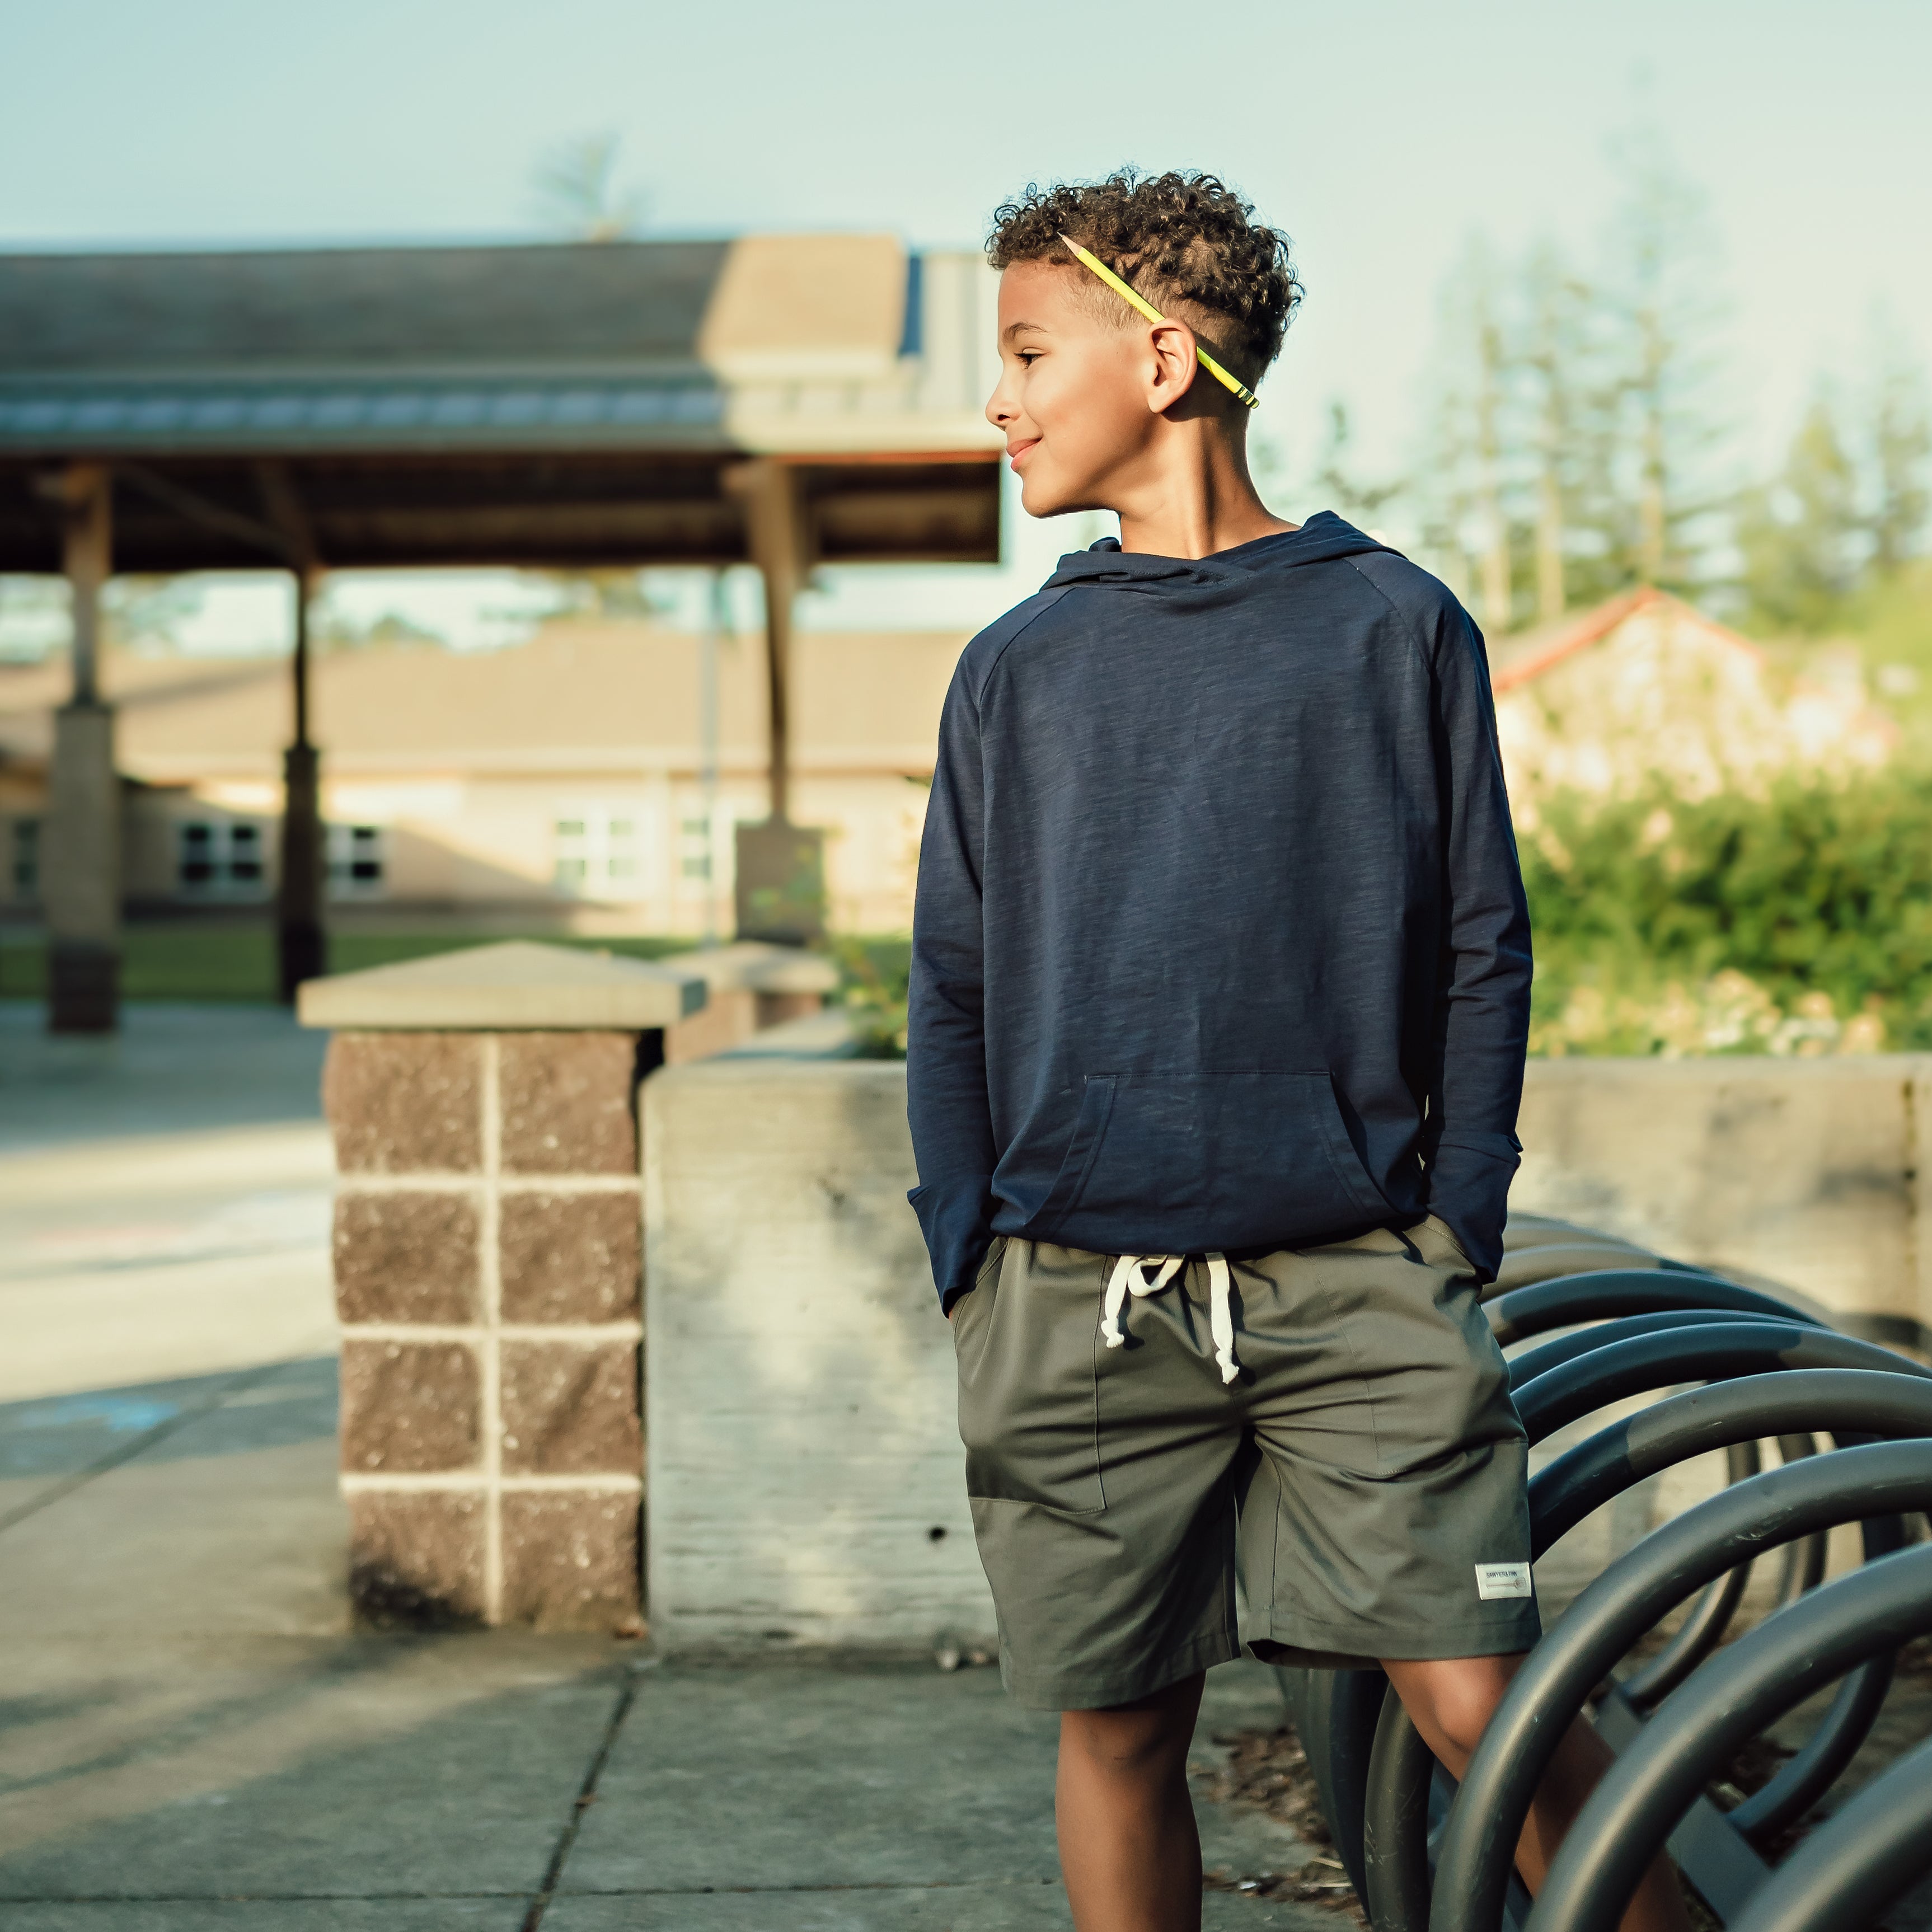 Boy standing near the school bike racks looking to the side with a pencil behind his ear. He is wearing a Sawyer & Finn navy hoodie and shorts.